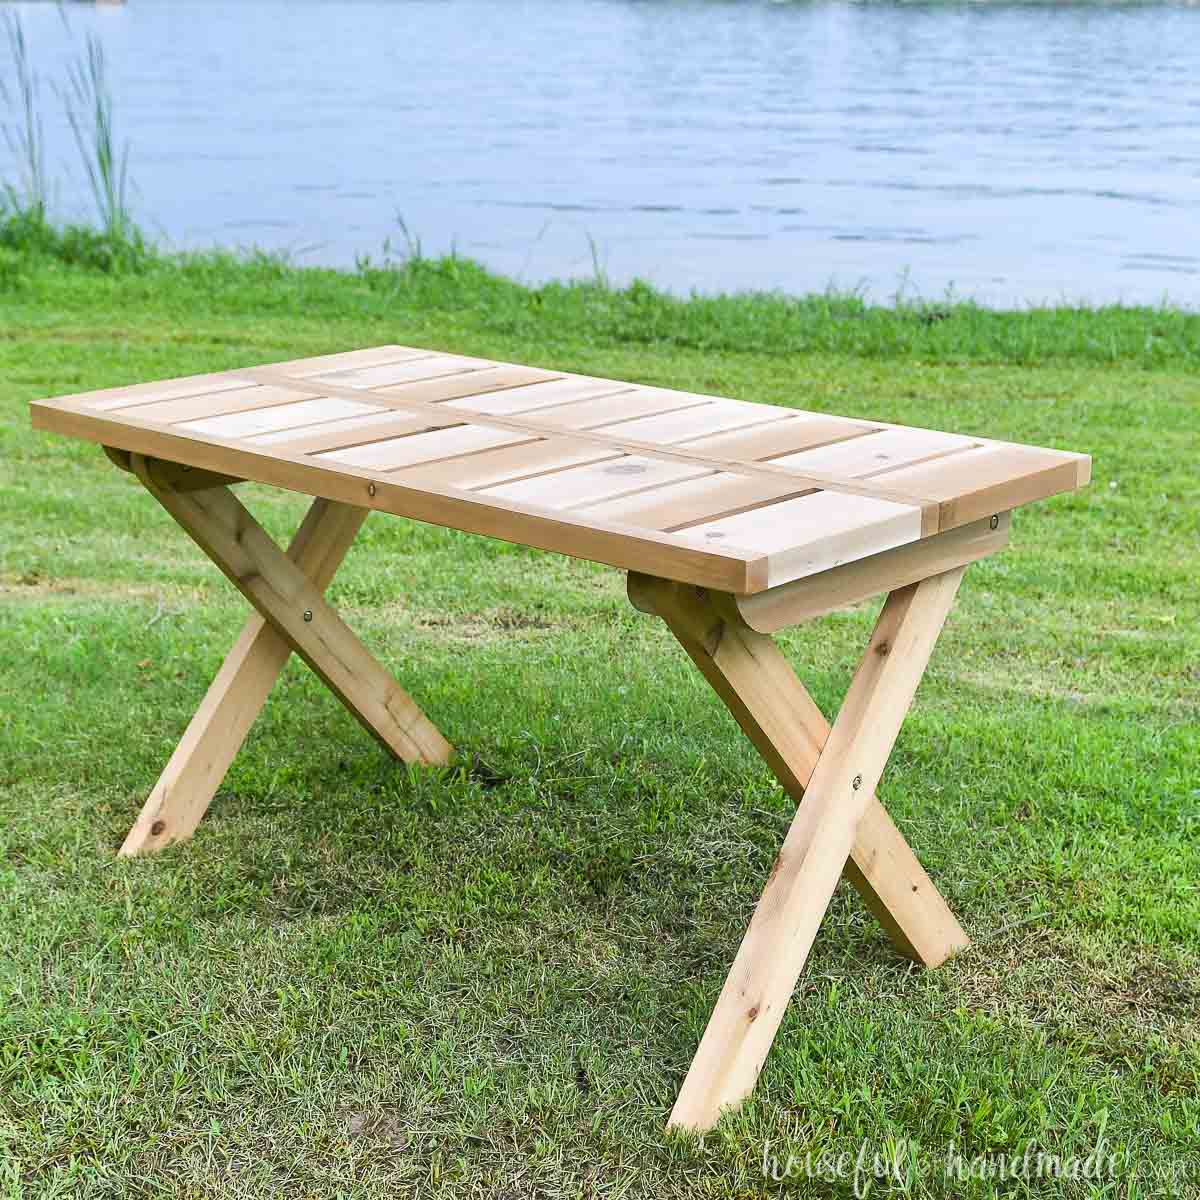 Wooden folding picnic table set up outside on the grass.